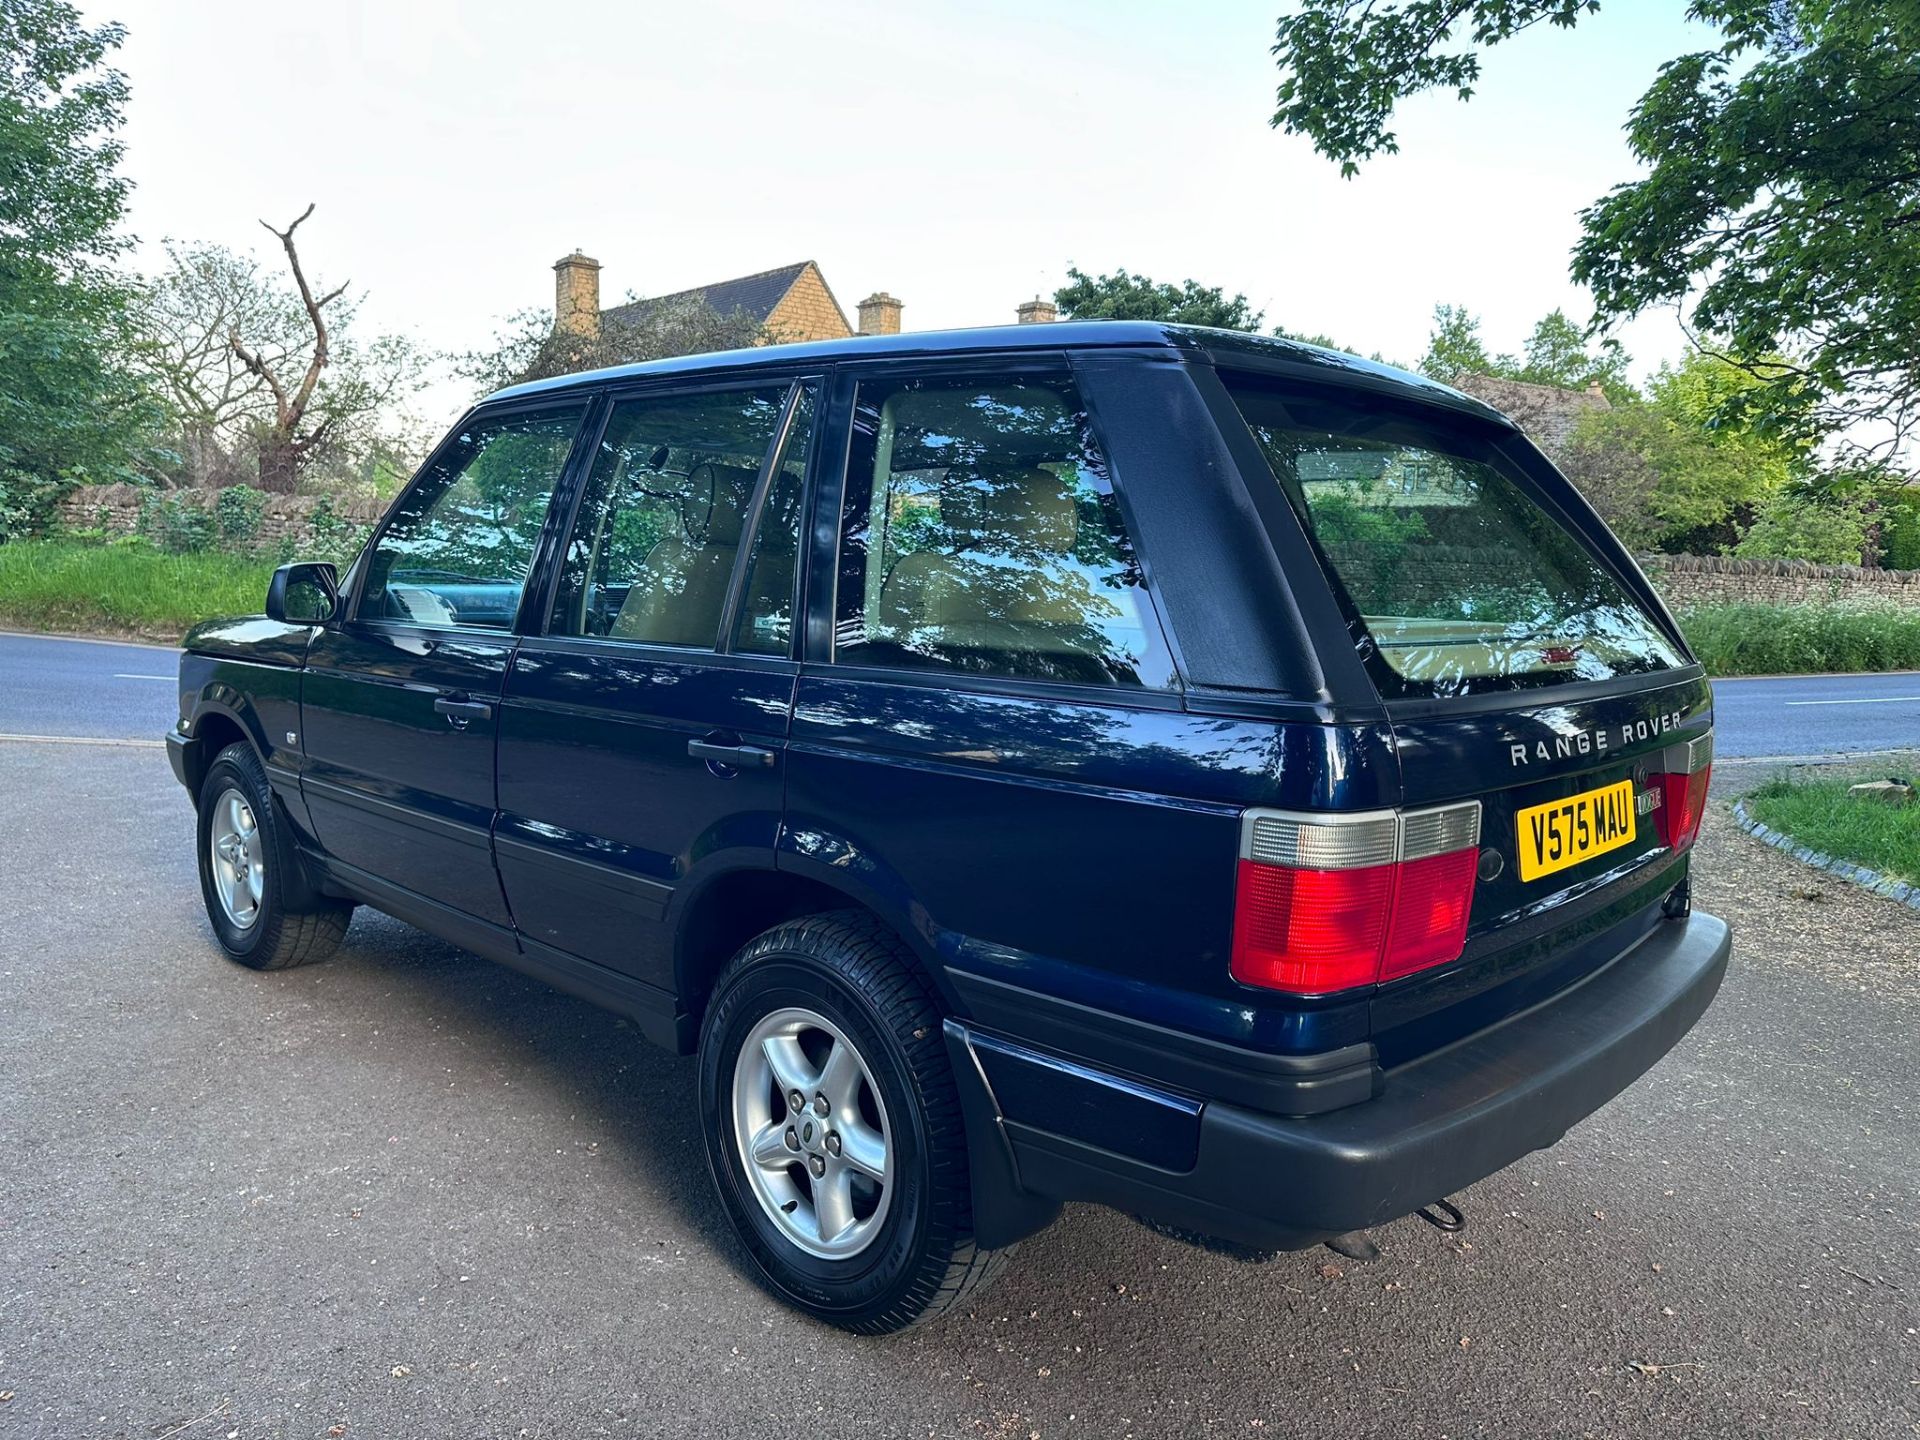 1999 RANGE ROVER VOGUE 4.6 V8 P38 (THOR ENGINE) - 59K MILES FROM NEW - Image 10 of 13